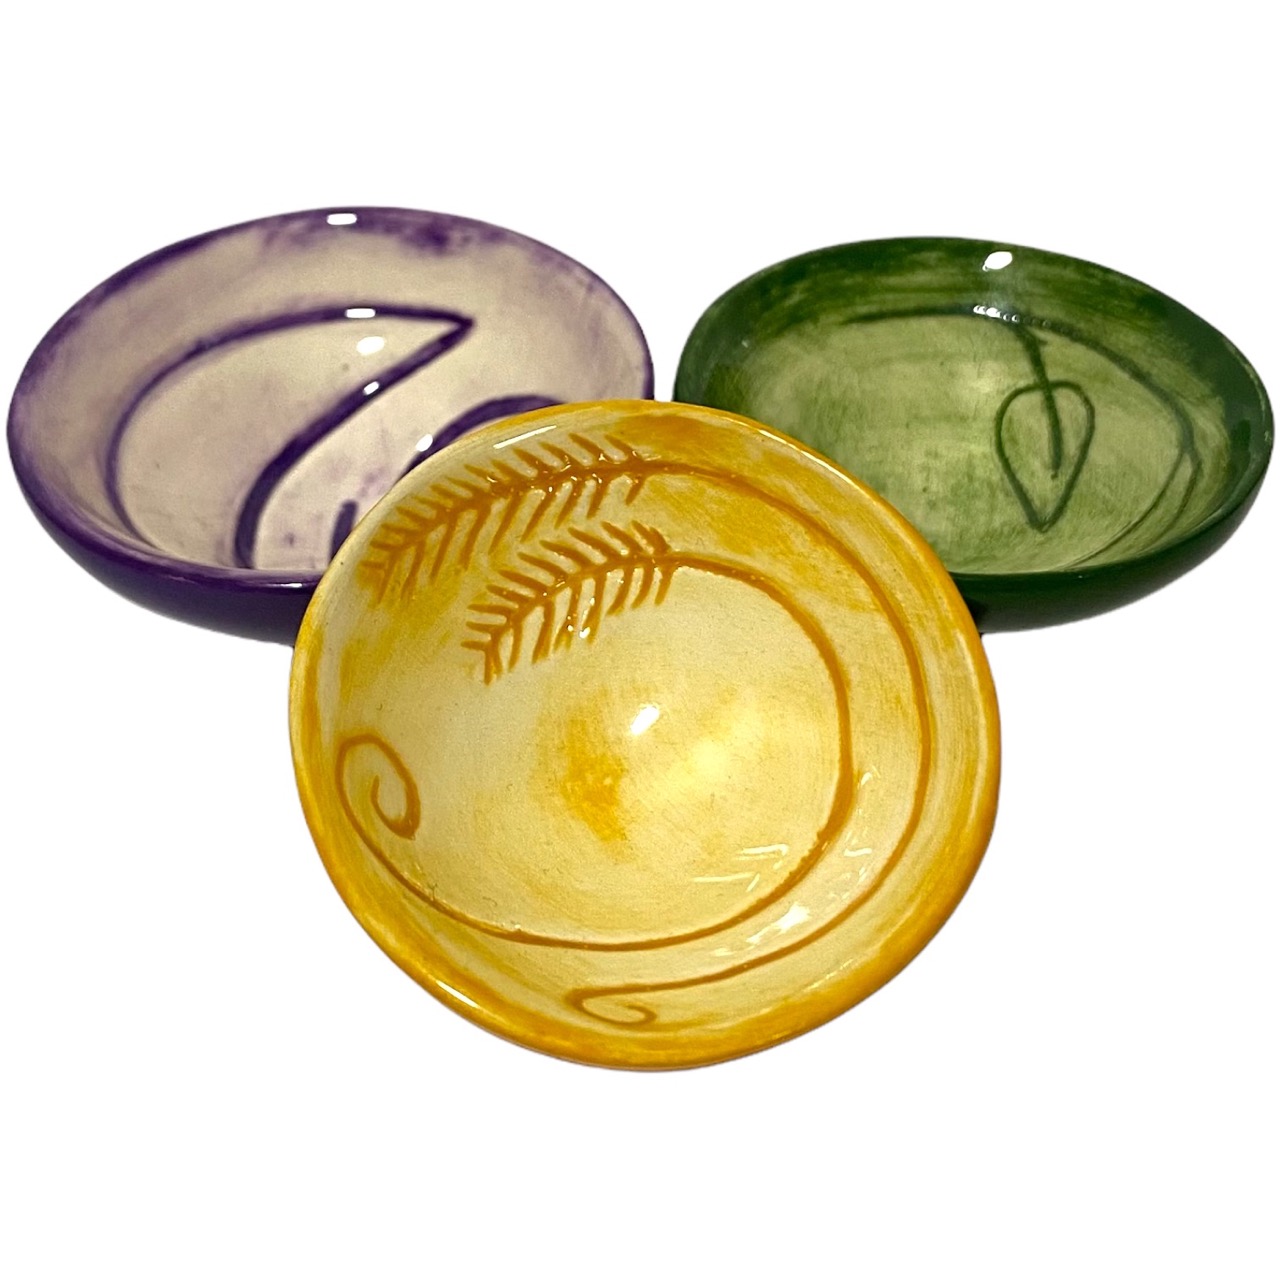 Anointing Bowls